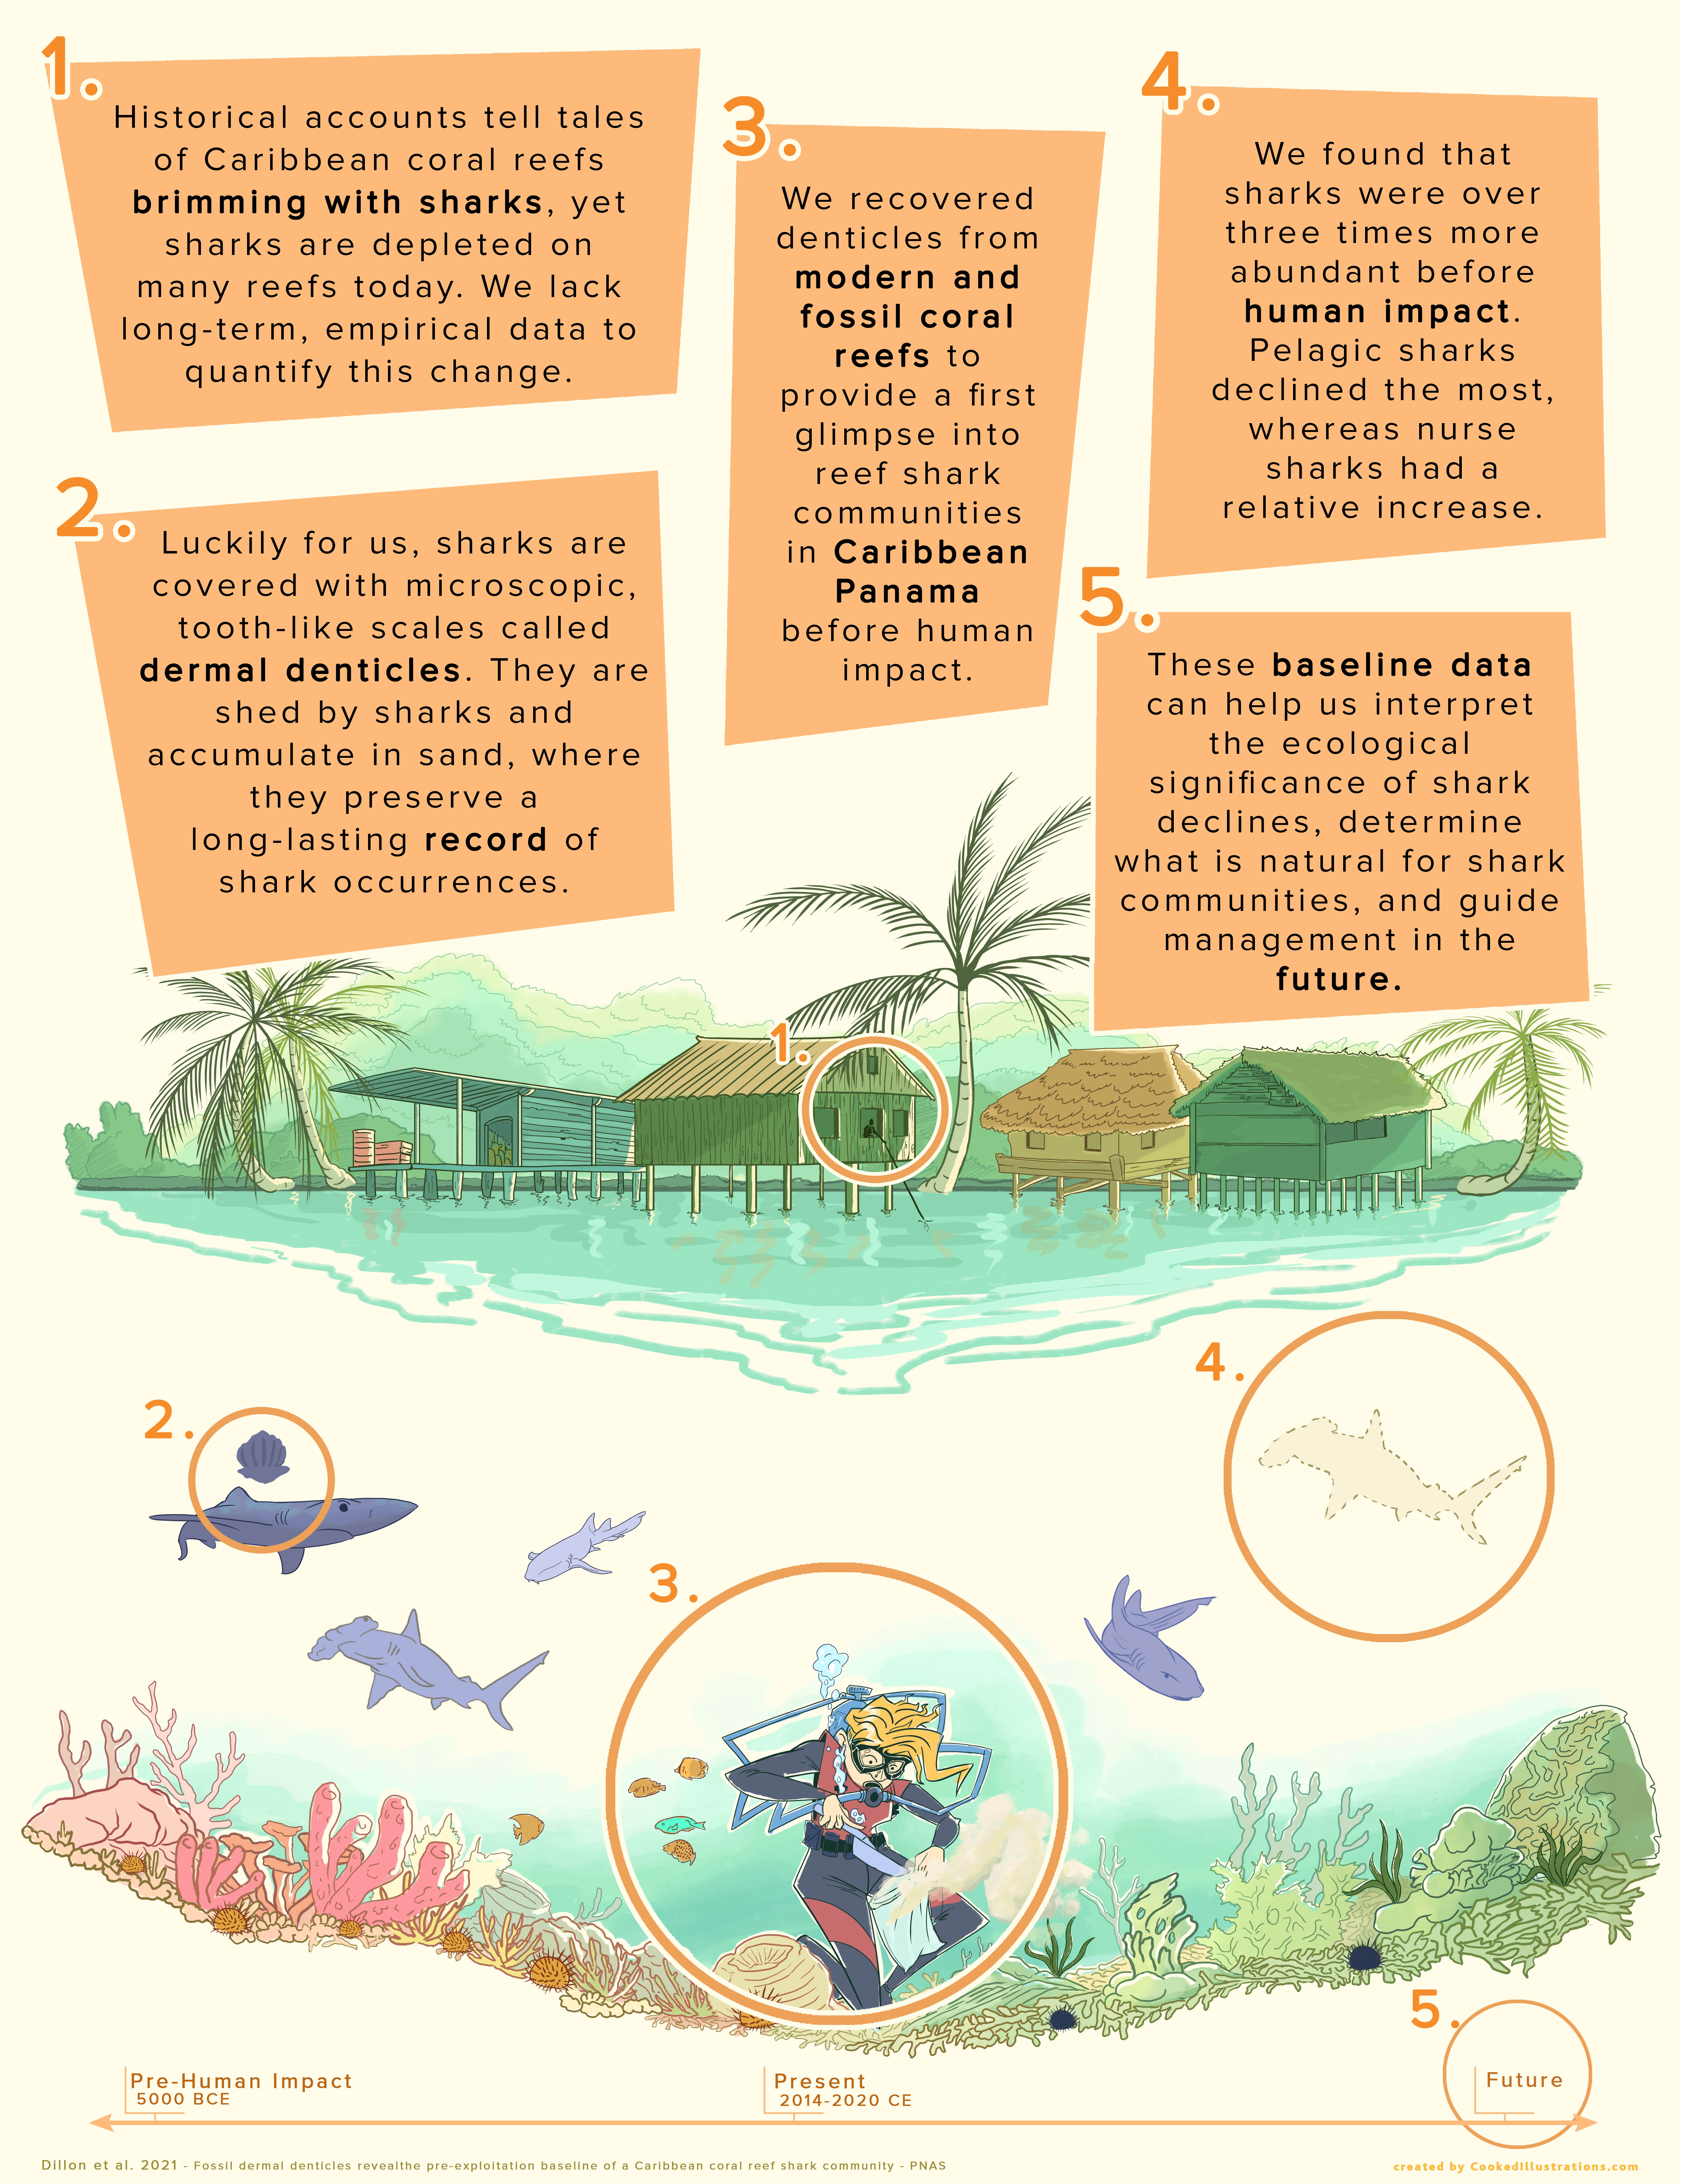 A poster showing a blonde woman in scuba gear collecting coral reef sediments. Sharks swim around her, a tropical coastal village shows. Informational texts.